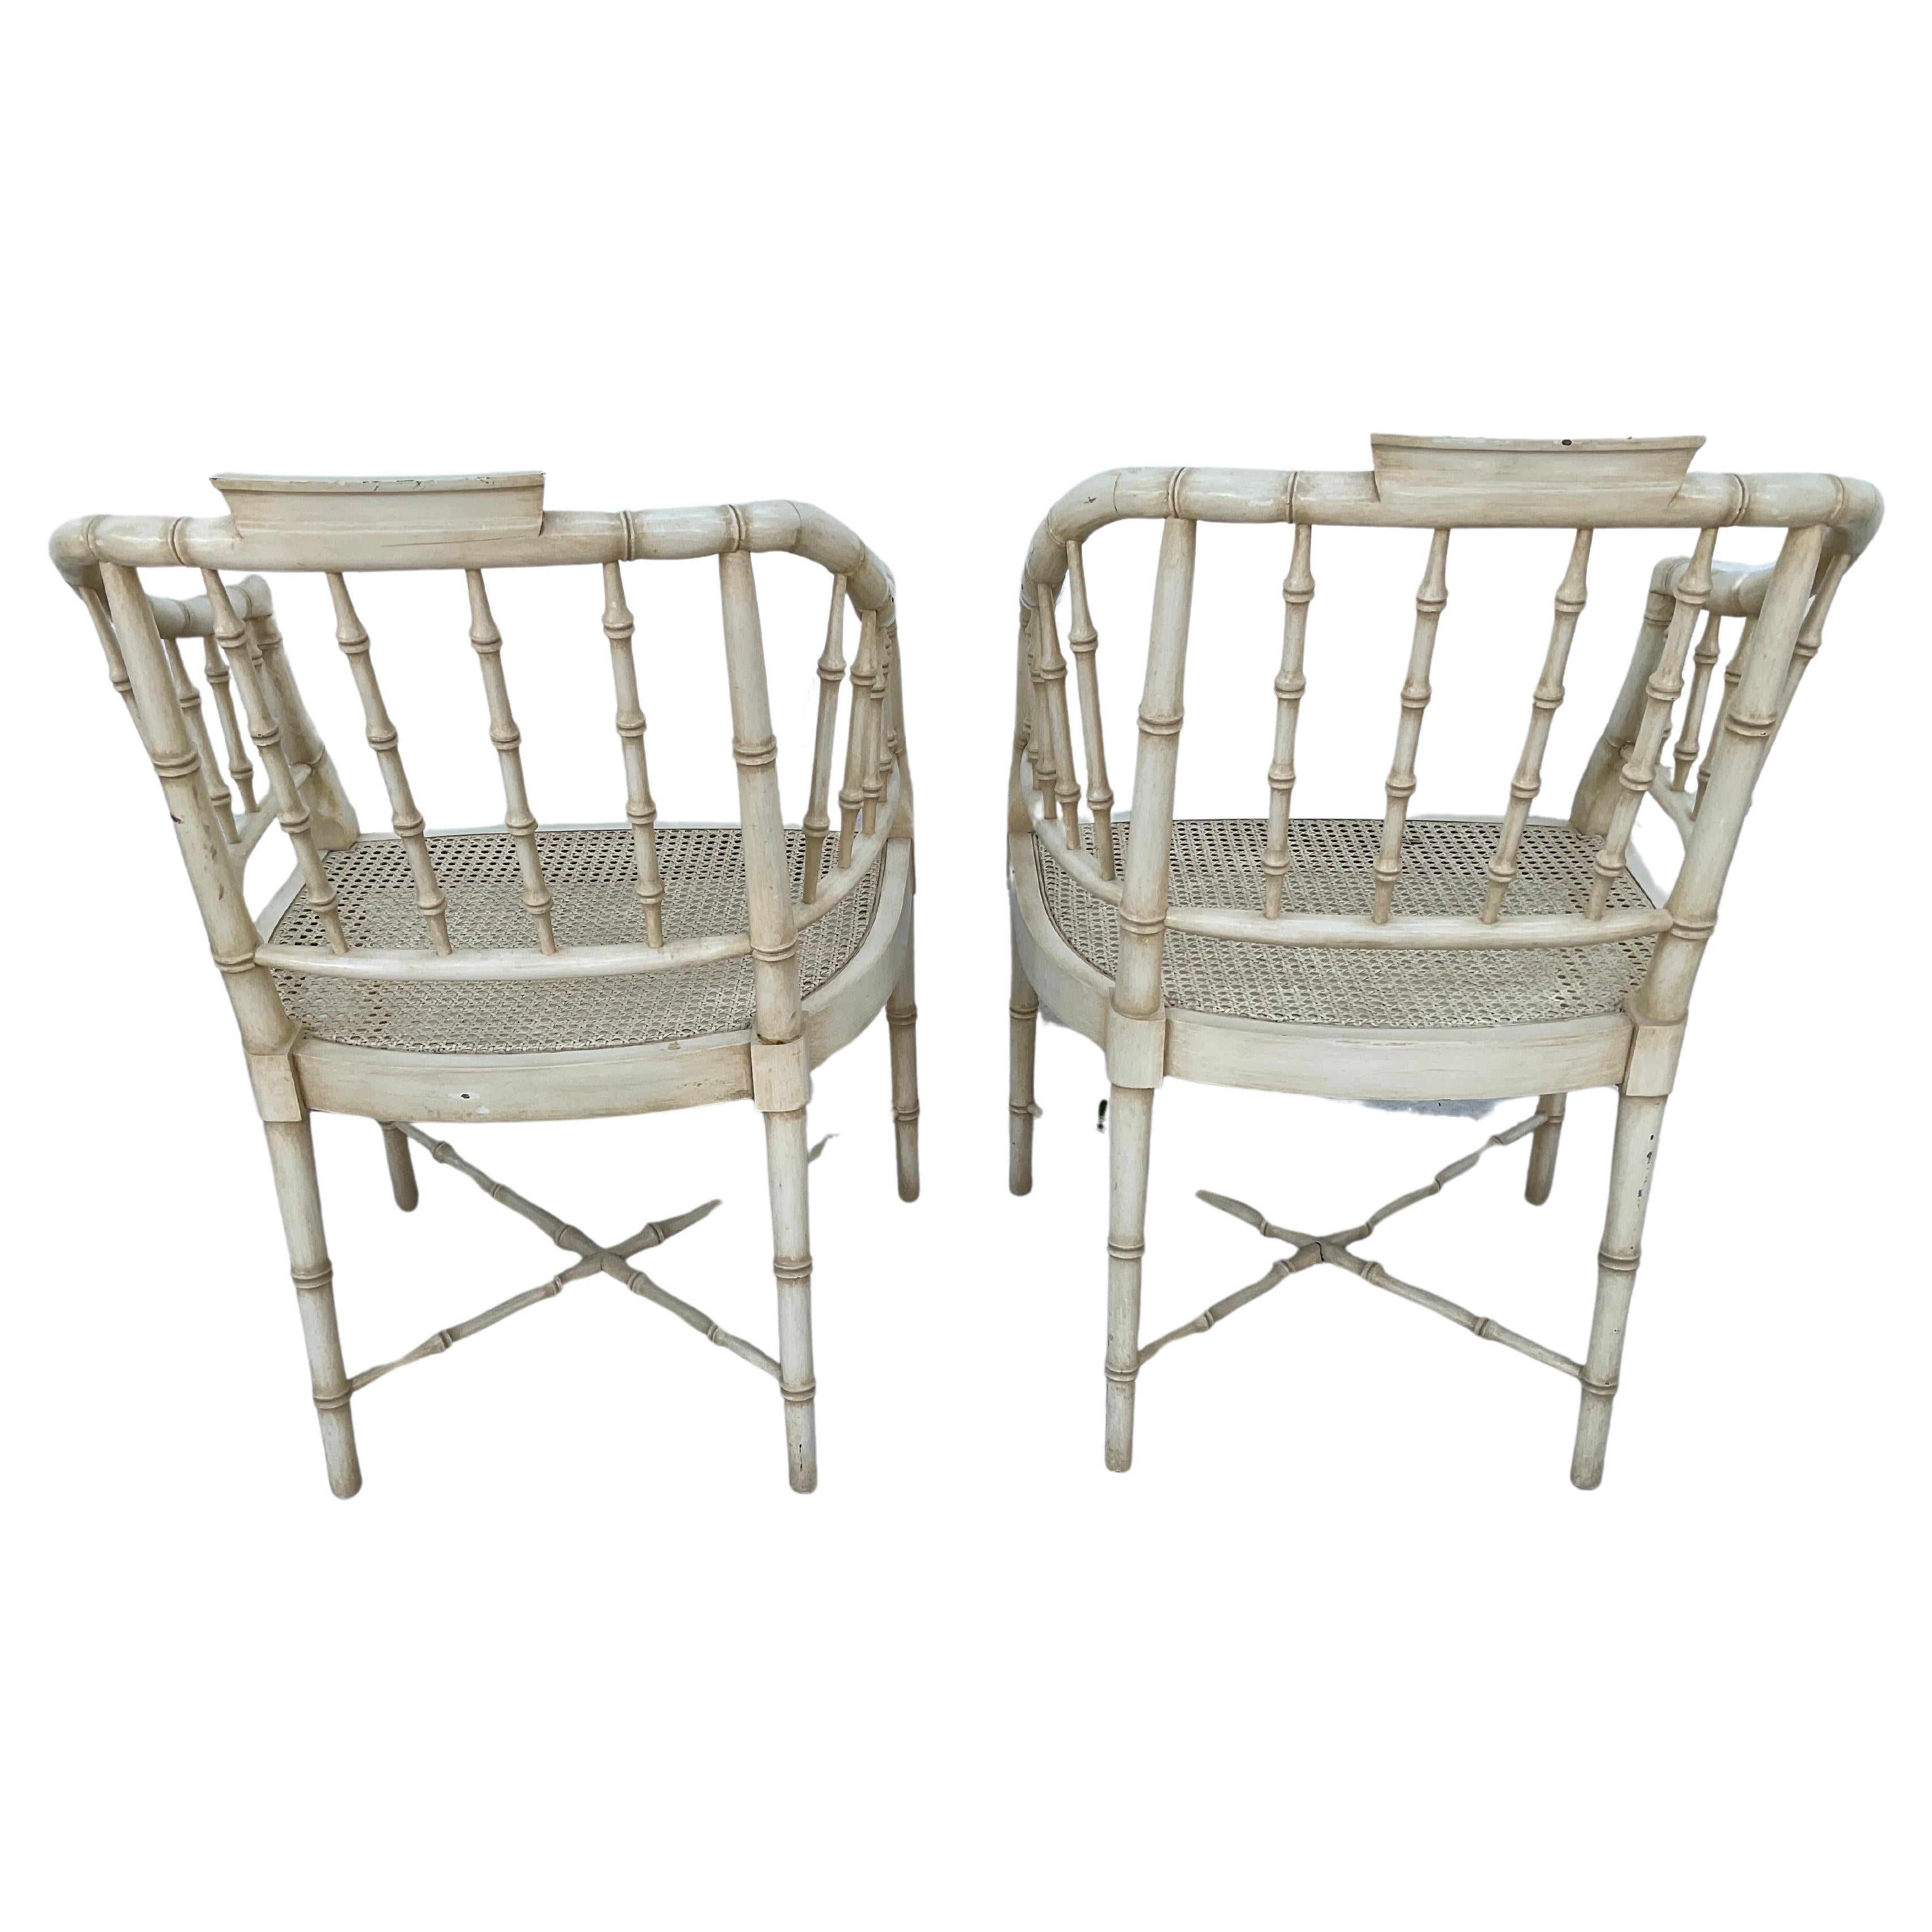 A Pair of Regency Style Faux Bamboo And Cane Armchairs In Good Condition For Sale In Bradenton, FL